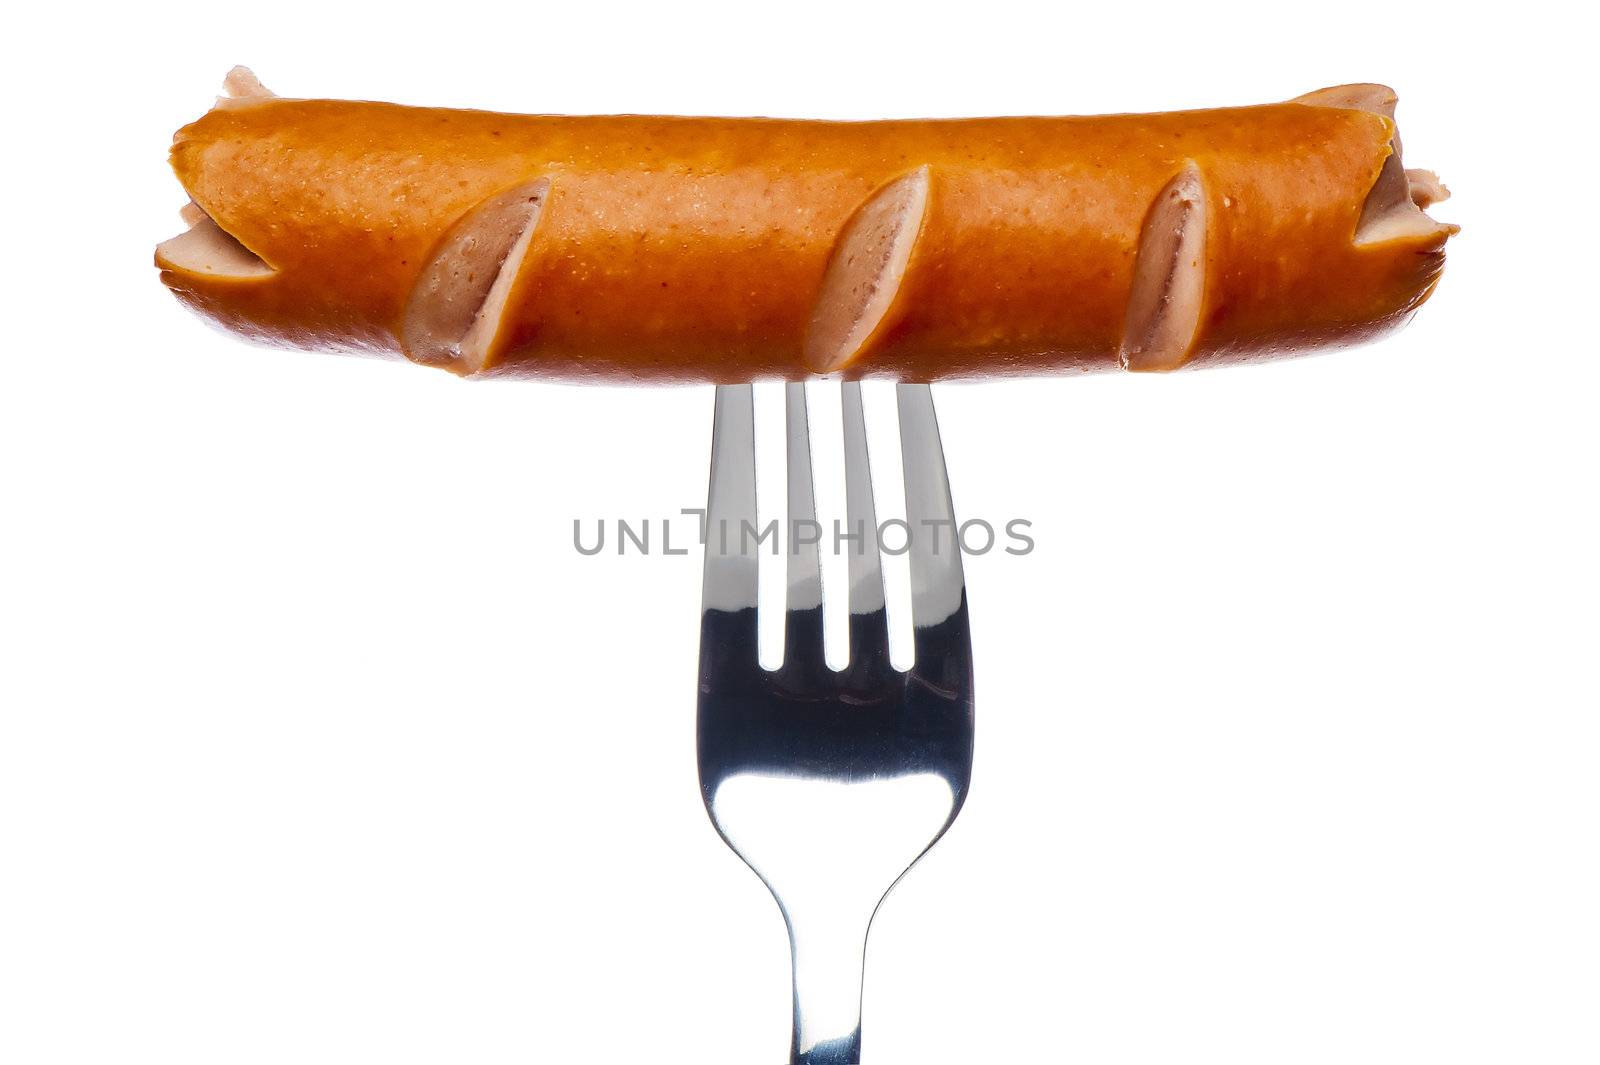 Cooking sausage on a fork on a white background by kosmsos111